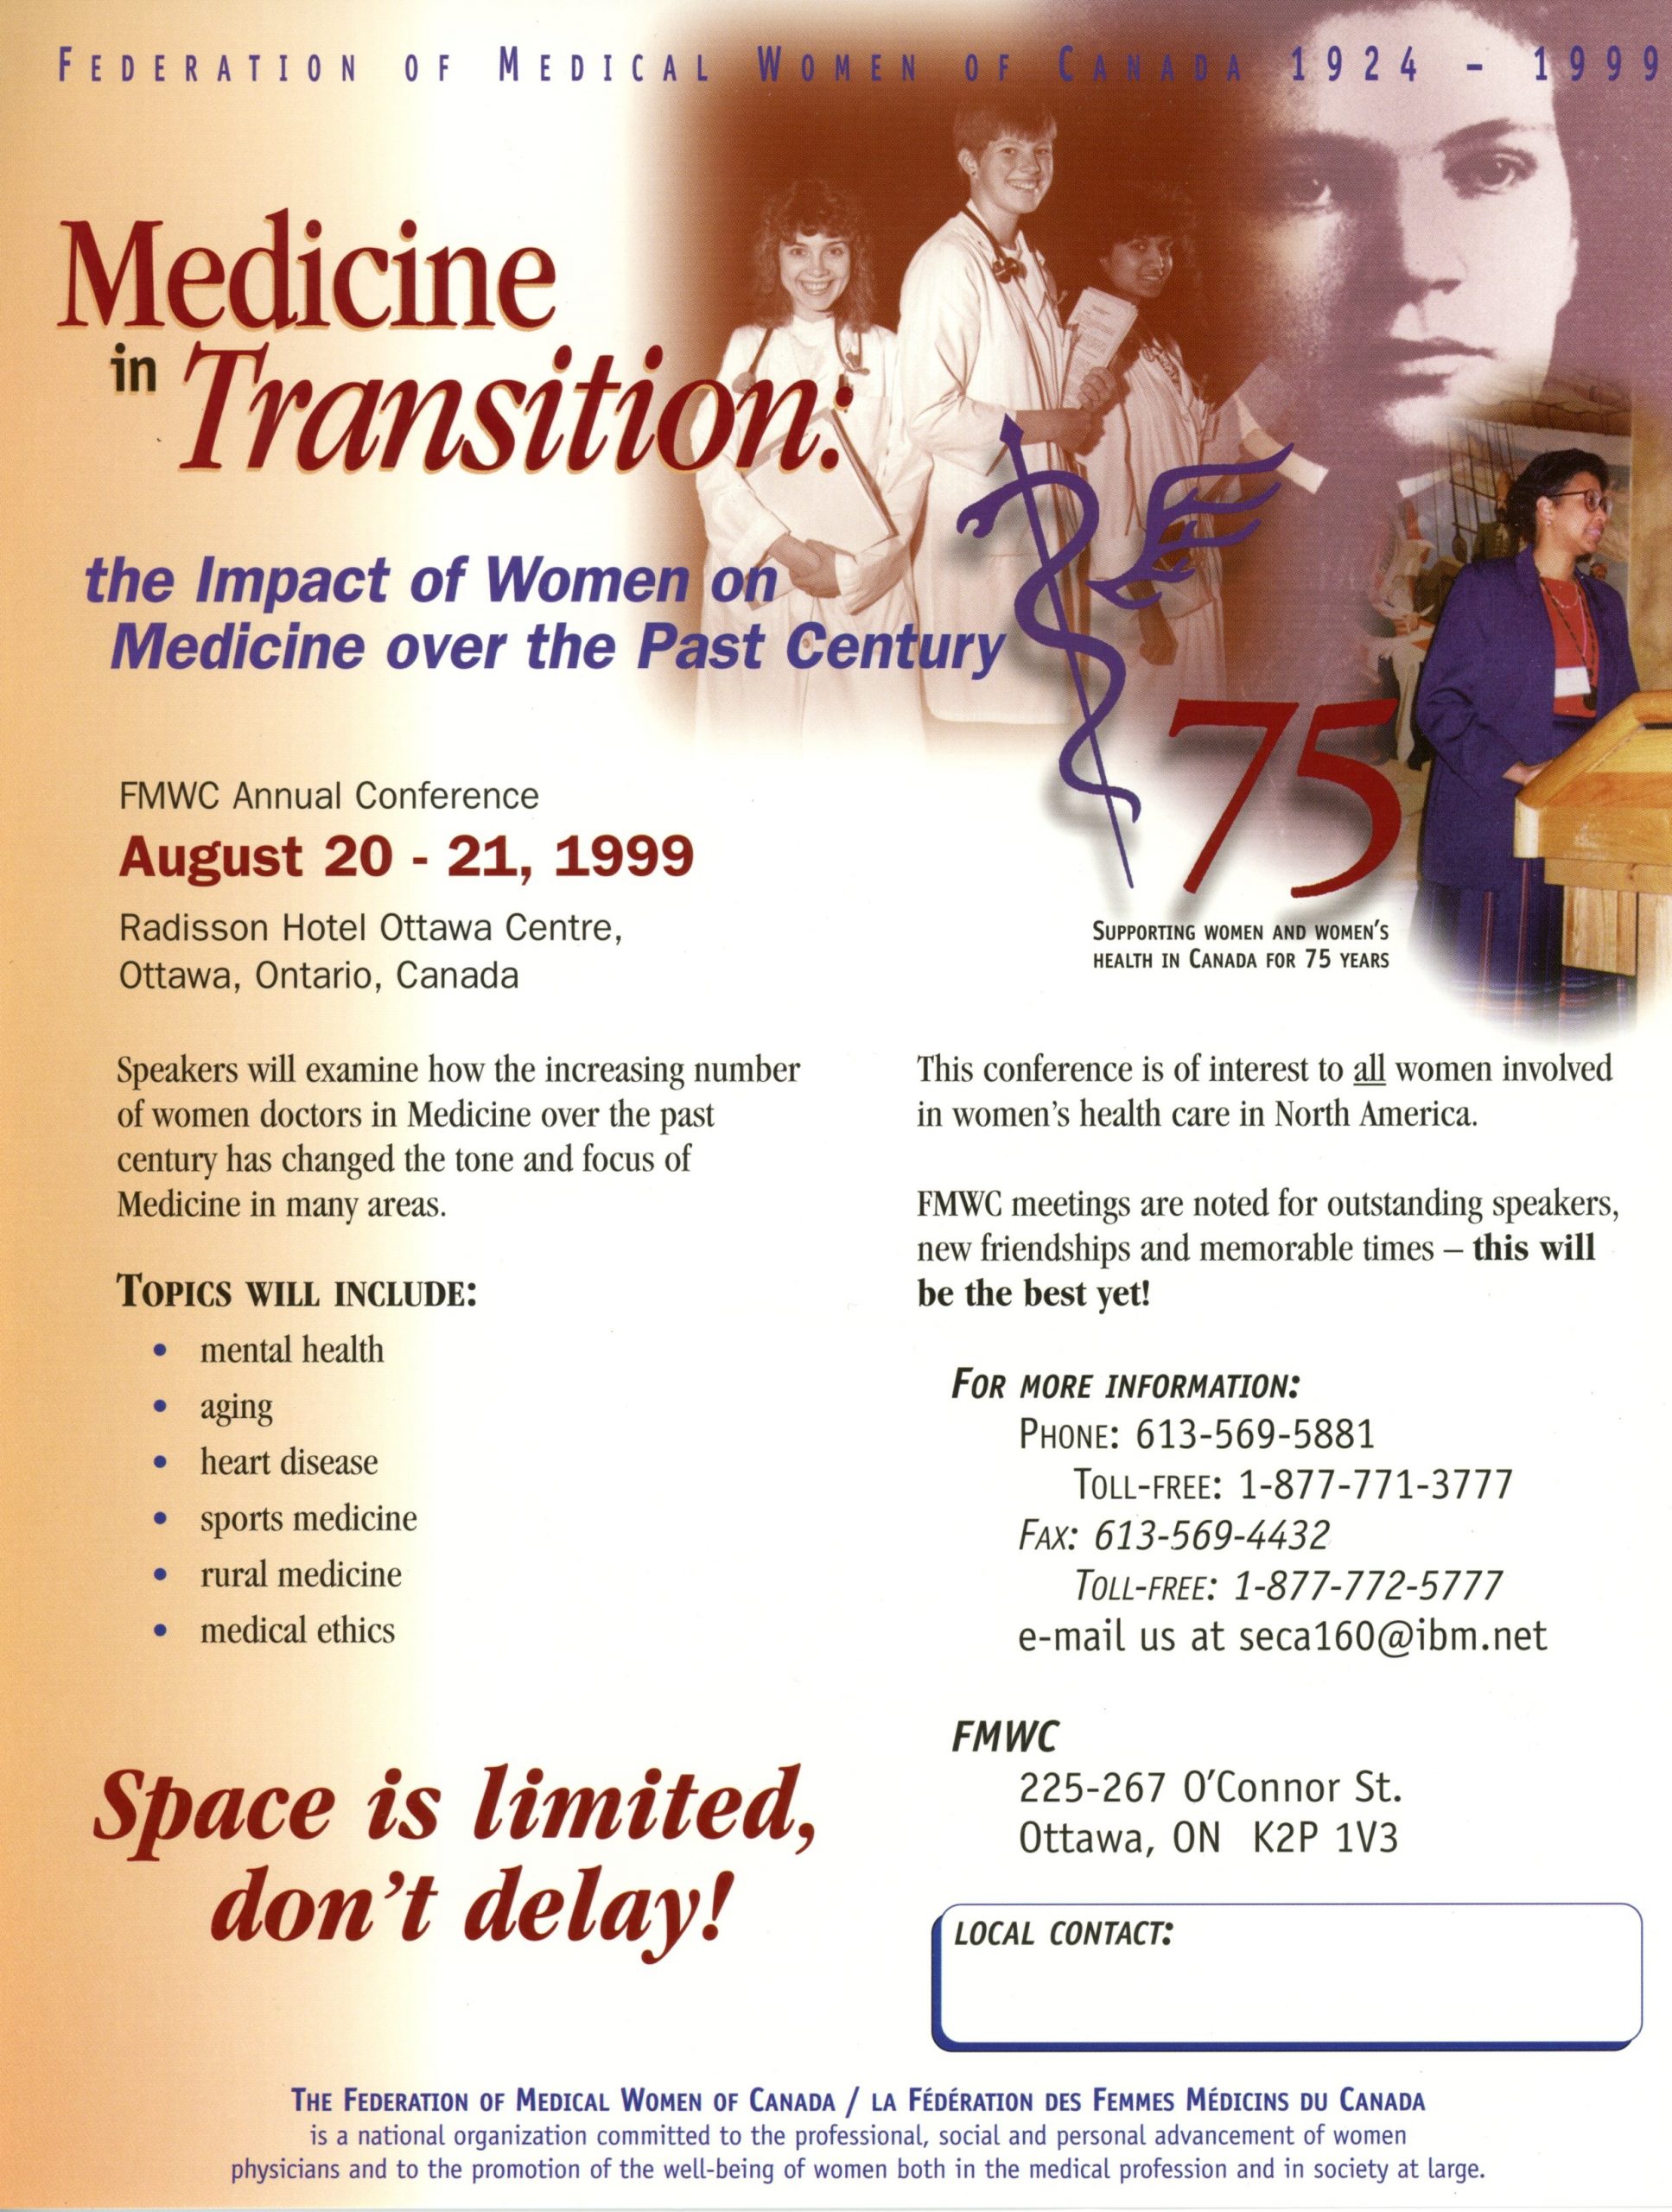 Colour poster of the annual conference of the Federation of Medical Women of Canada in 1999. Across the top of the poster, in blue letters, is written “Federation of Medical Women of Canada 1924 – 1999”. Below this and to the left is the title of the conference. To the right of the title, there are three superimposed images. The first is a photograph of three young women wearing white lab coats. Behind them is a portrait of Maude Abbott, and in the foreground, Dr. Charmaine Roye giving a speech. The bottom half of the poster lists the topics to be presented and contact information for the association.